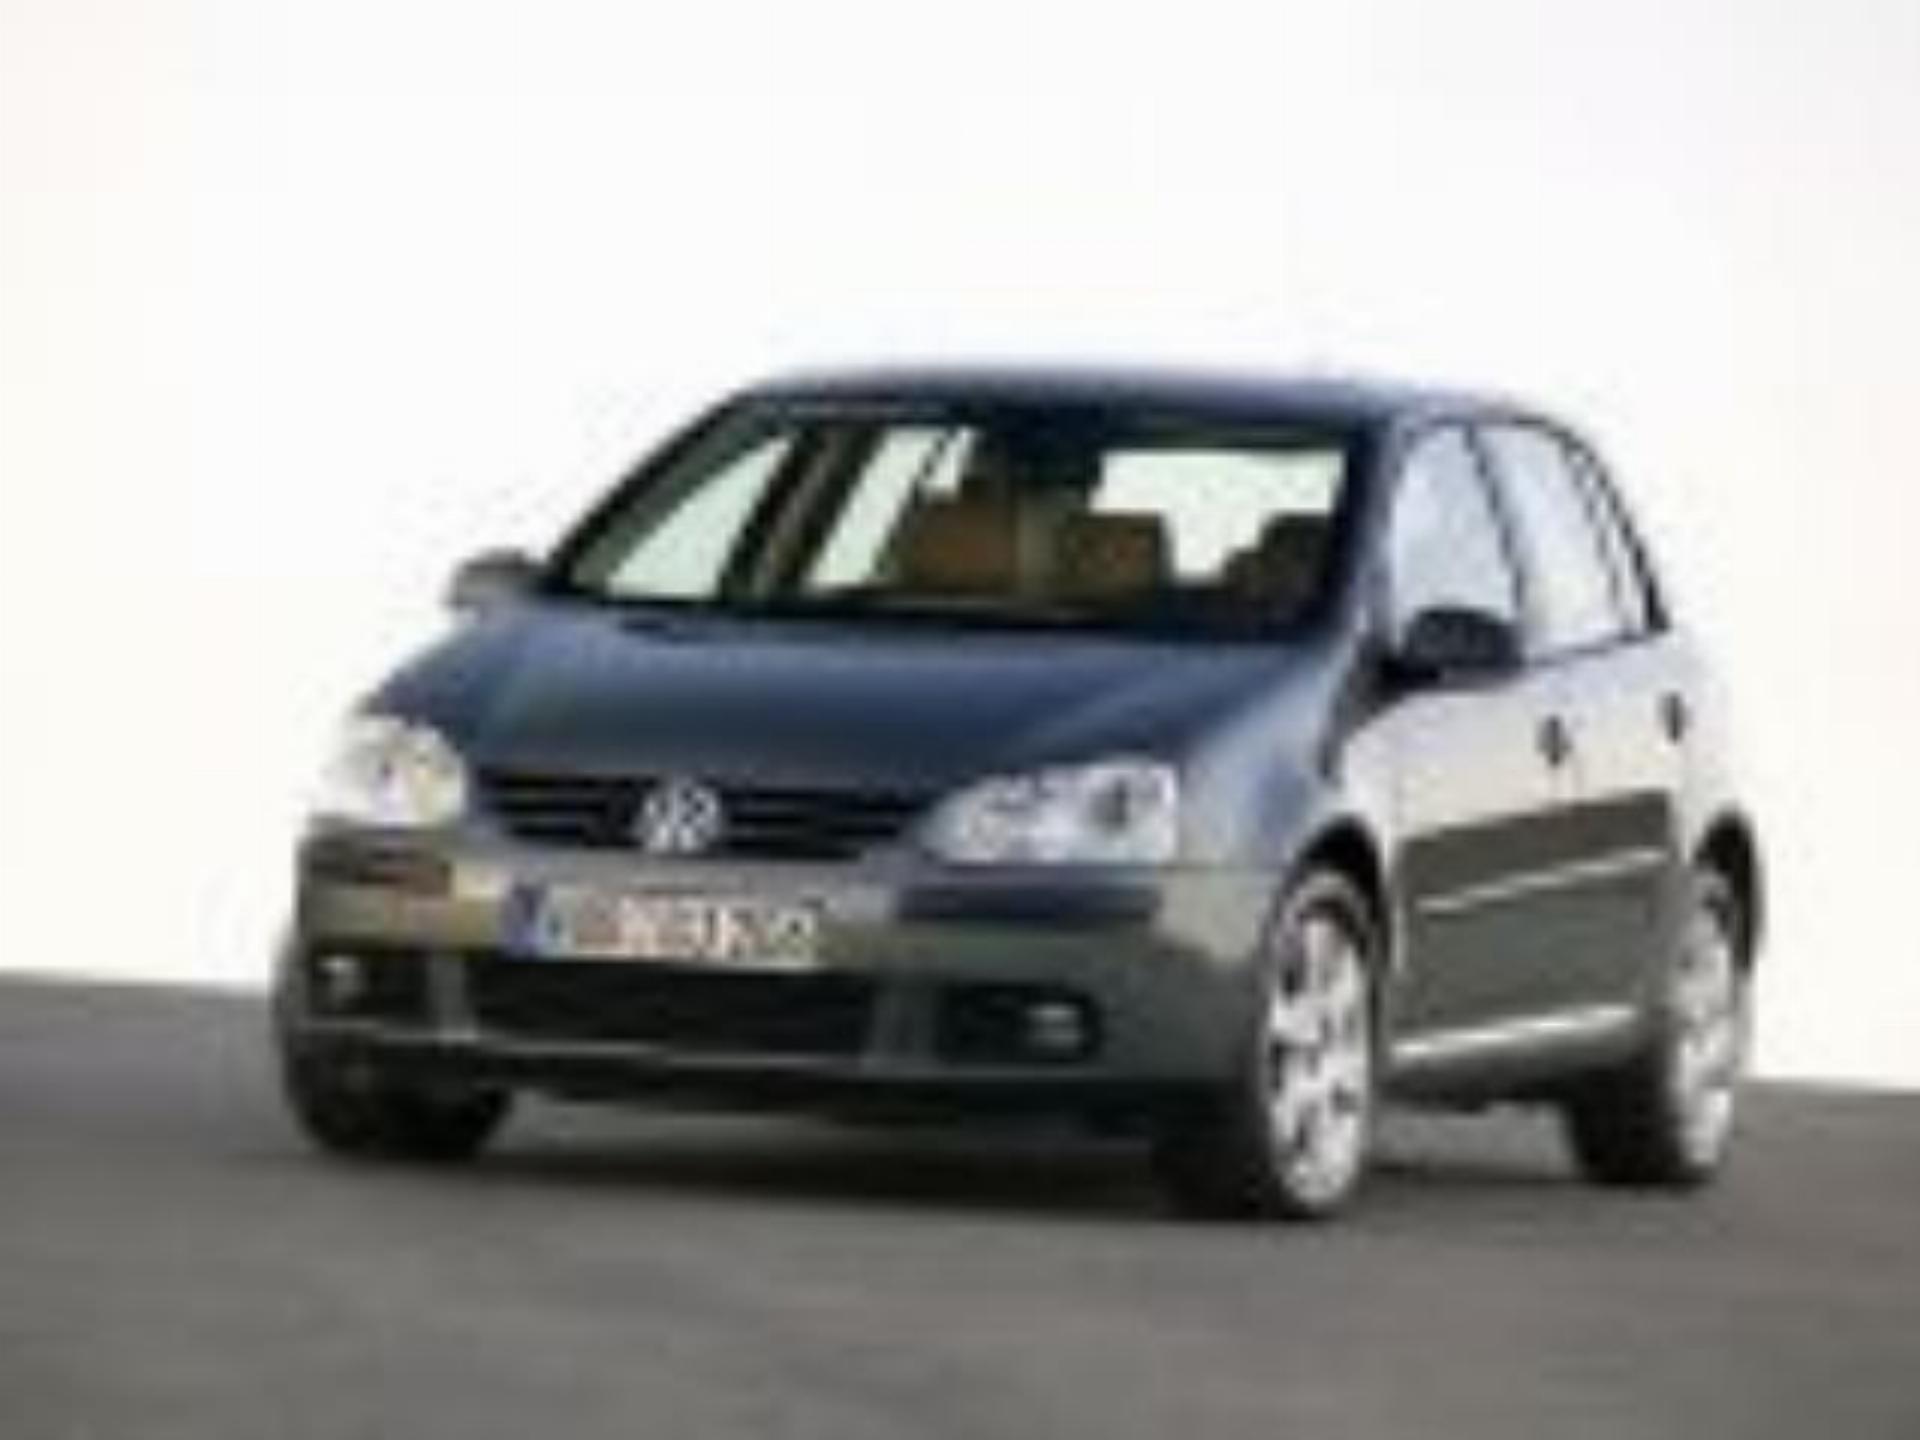 Volkswagen Golf 5 Black Color Exclent Engine Condition Guaranted